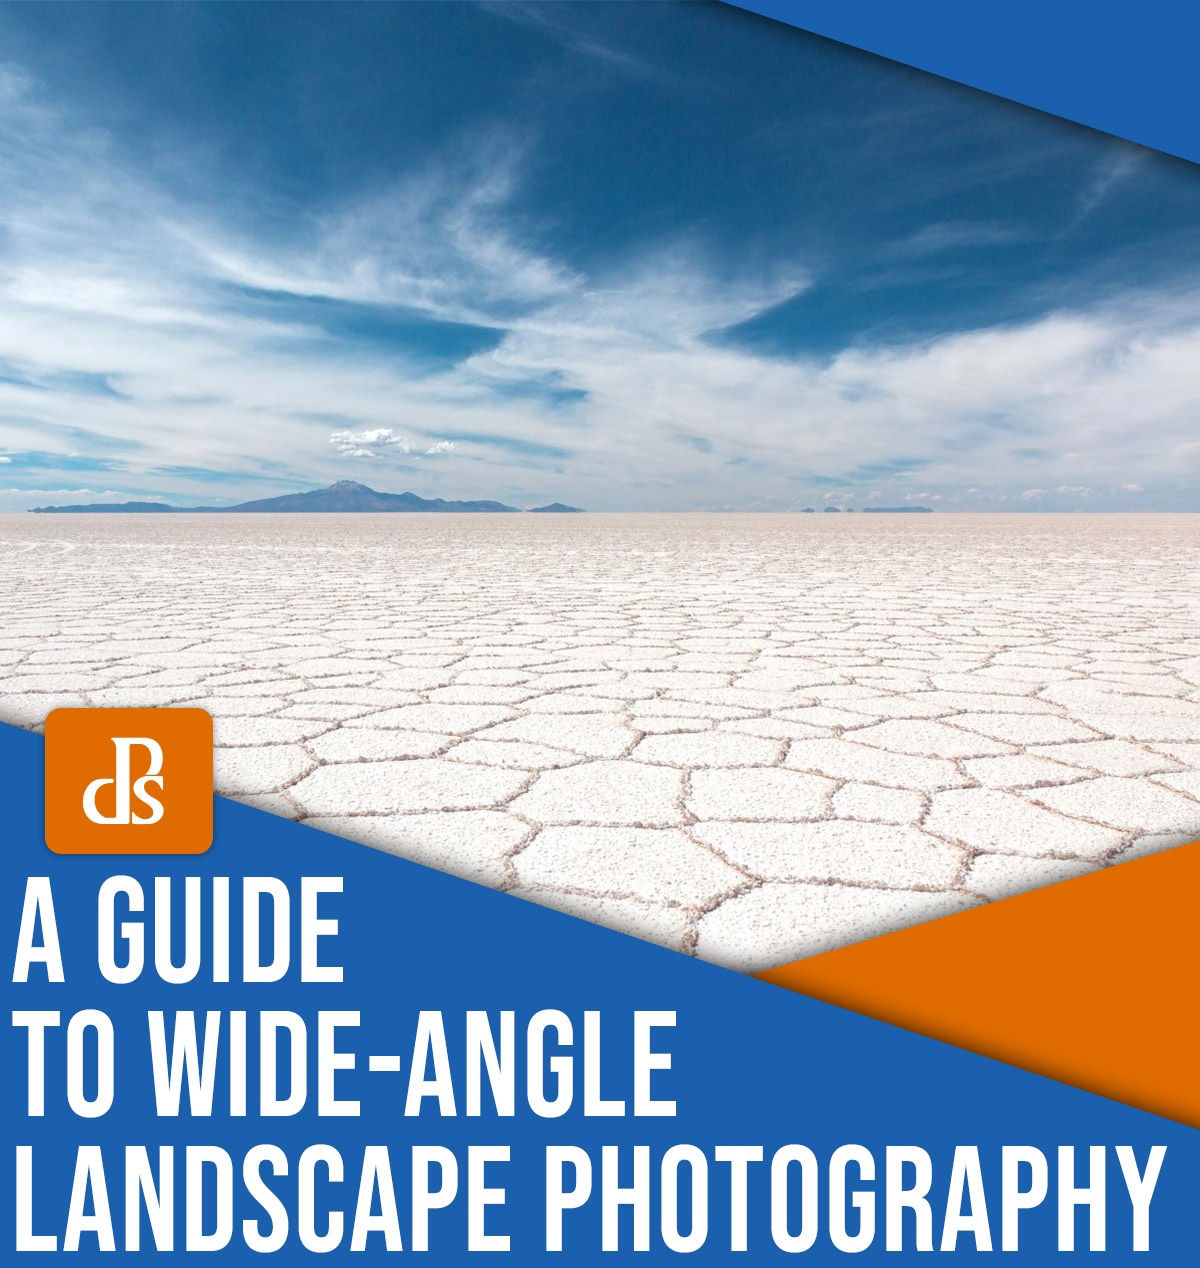 A guide to wide-angle landscape photography